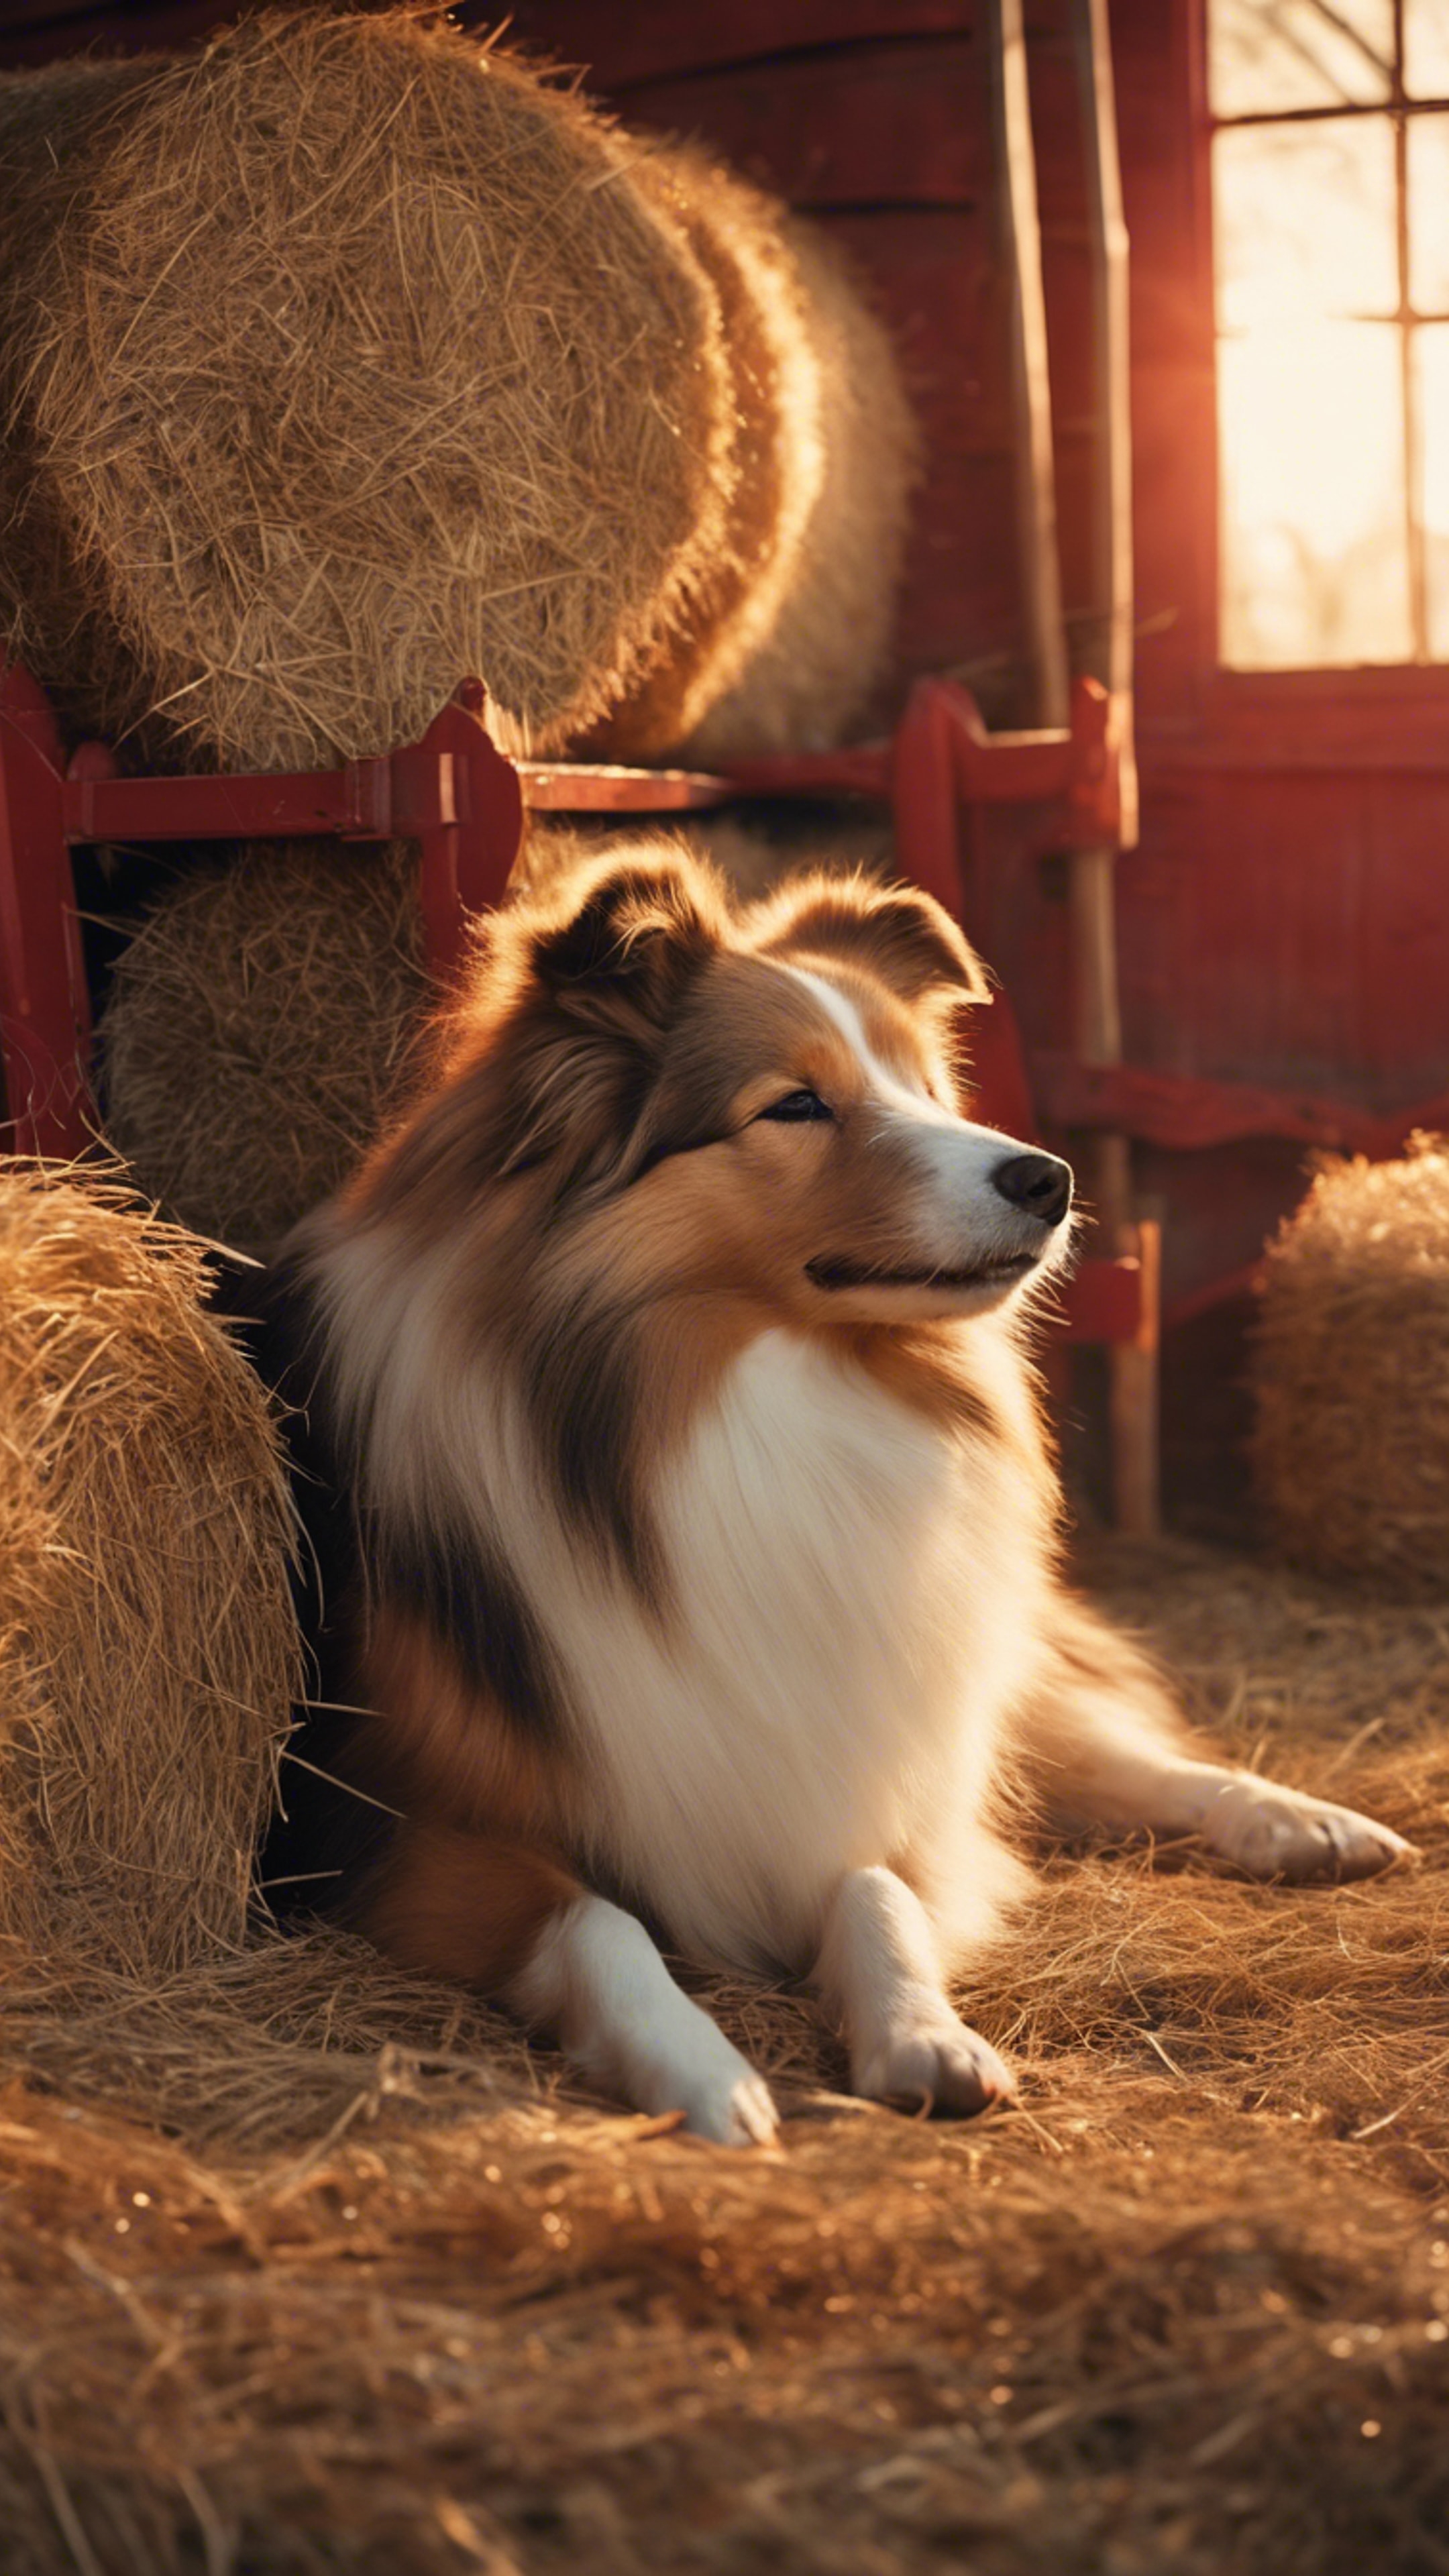 A Shetland Sheepdog sleeping in a vintage red barn, surrounded by hay balls and a setting sun. ورق الجدران[4b8e09167f2043c5830e]